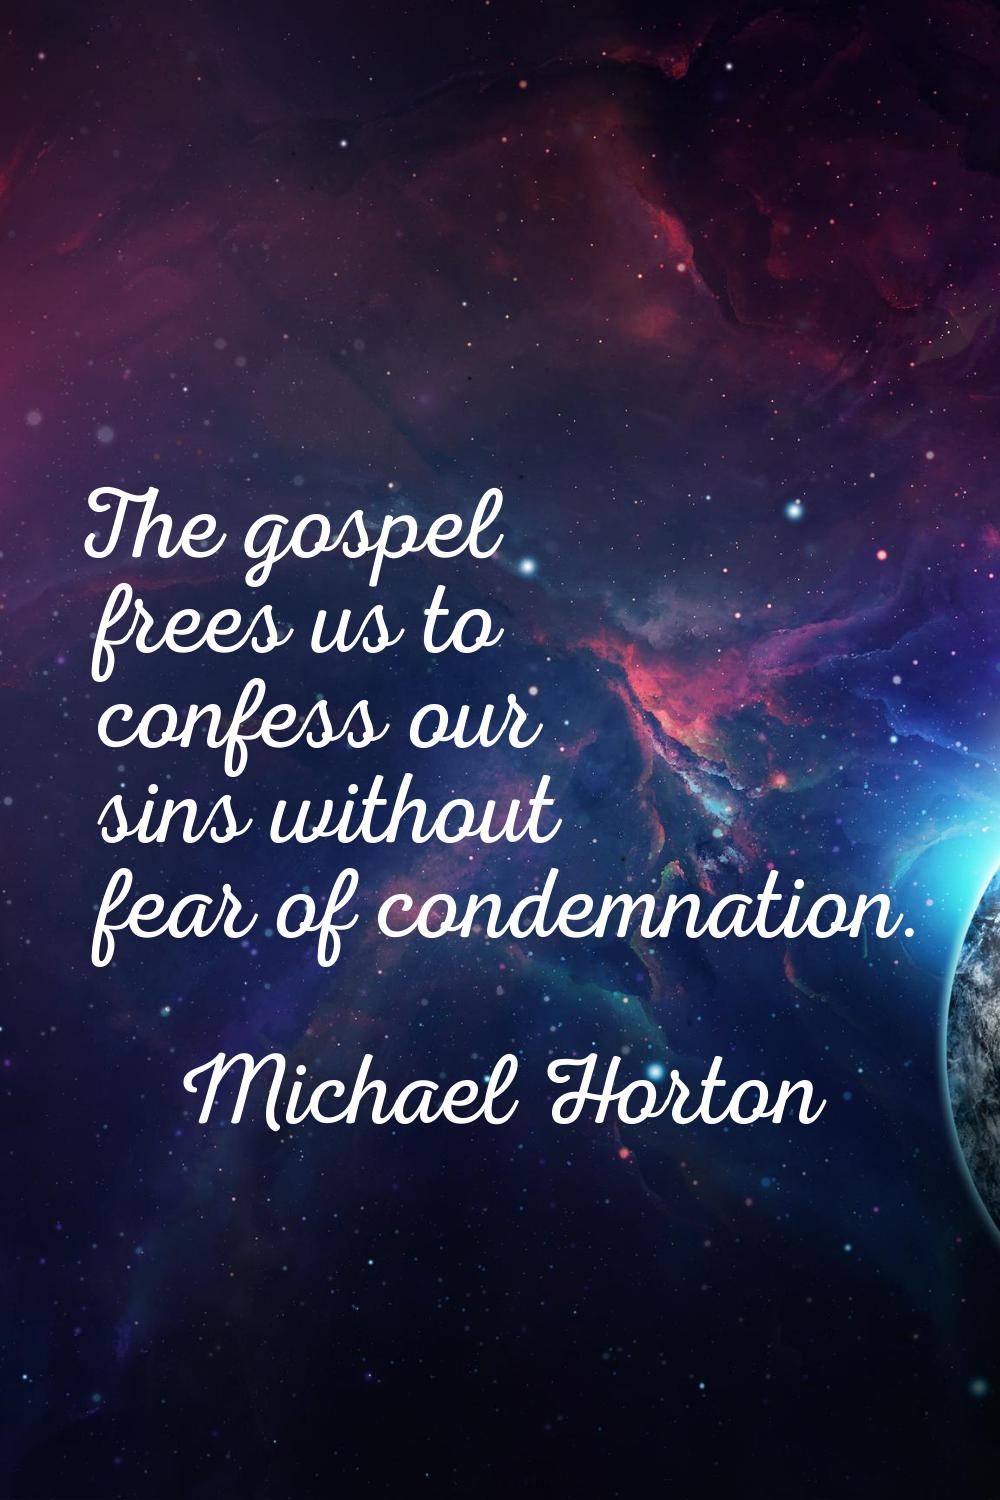 The gospel frees us to confess our sins without fear of condemnation.